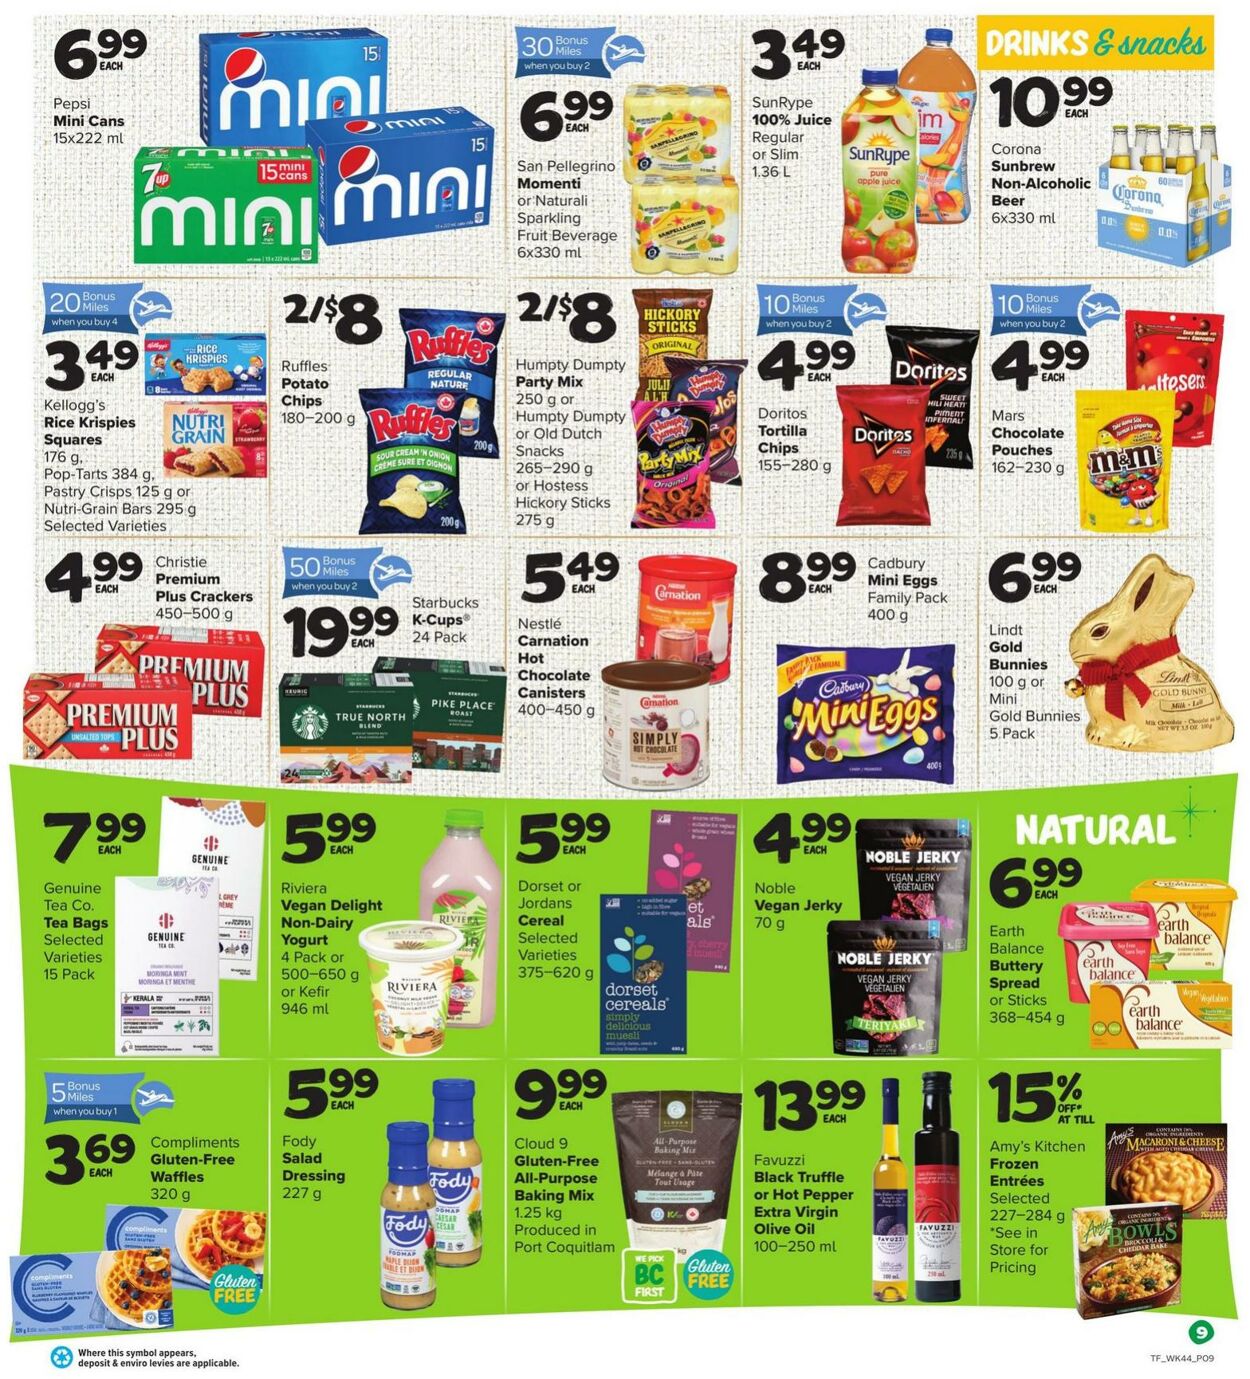 Flyer Thrifty Foods 02.03.2023 - 08.03.2023